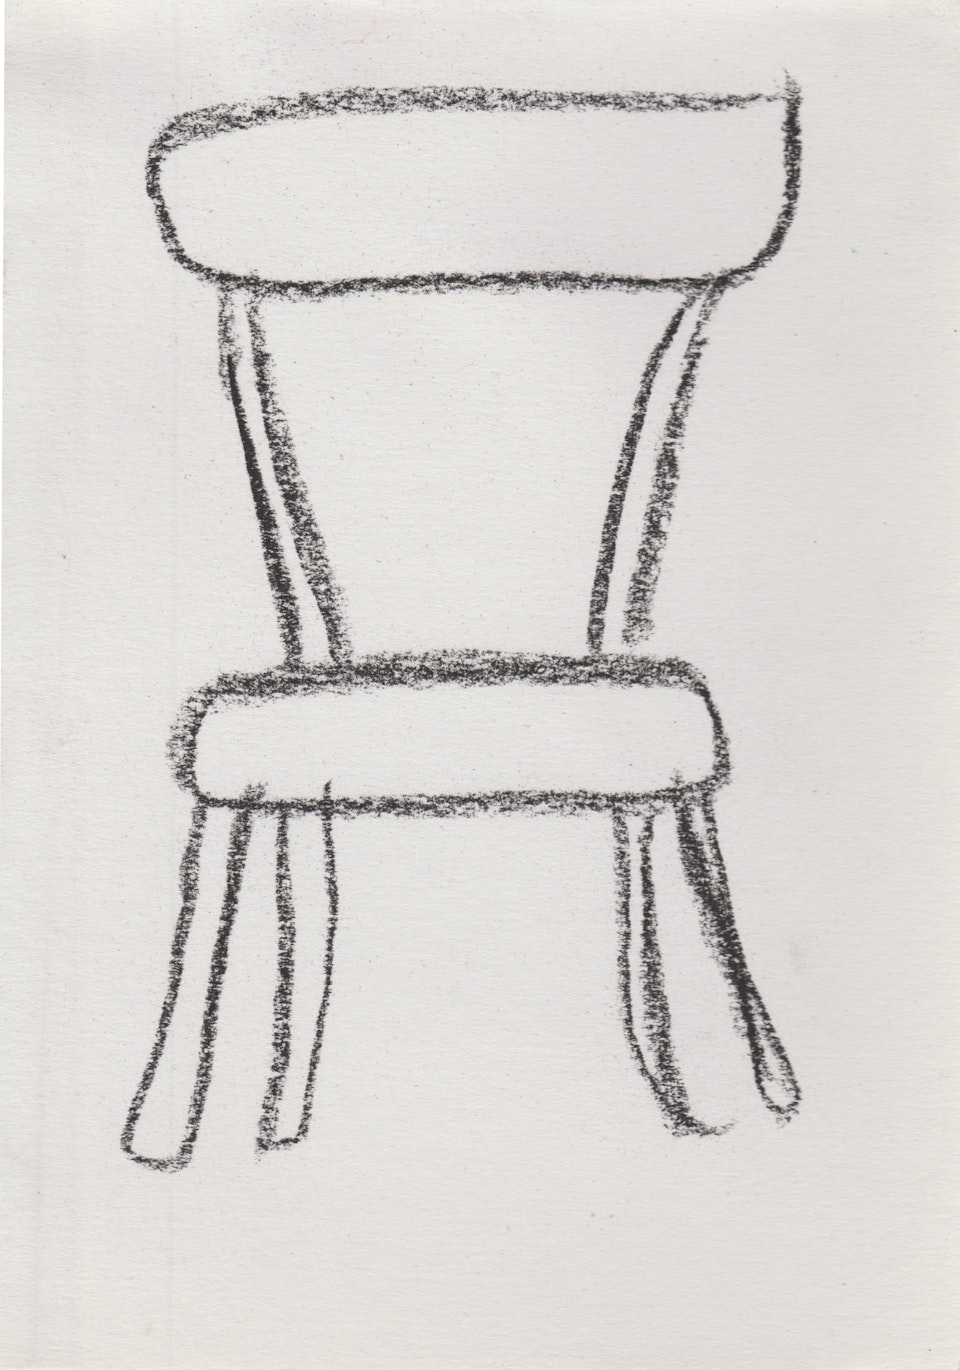 Domestic - Chair - 2020 - Charcoal on Paper - 10 x 15 cm A6